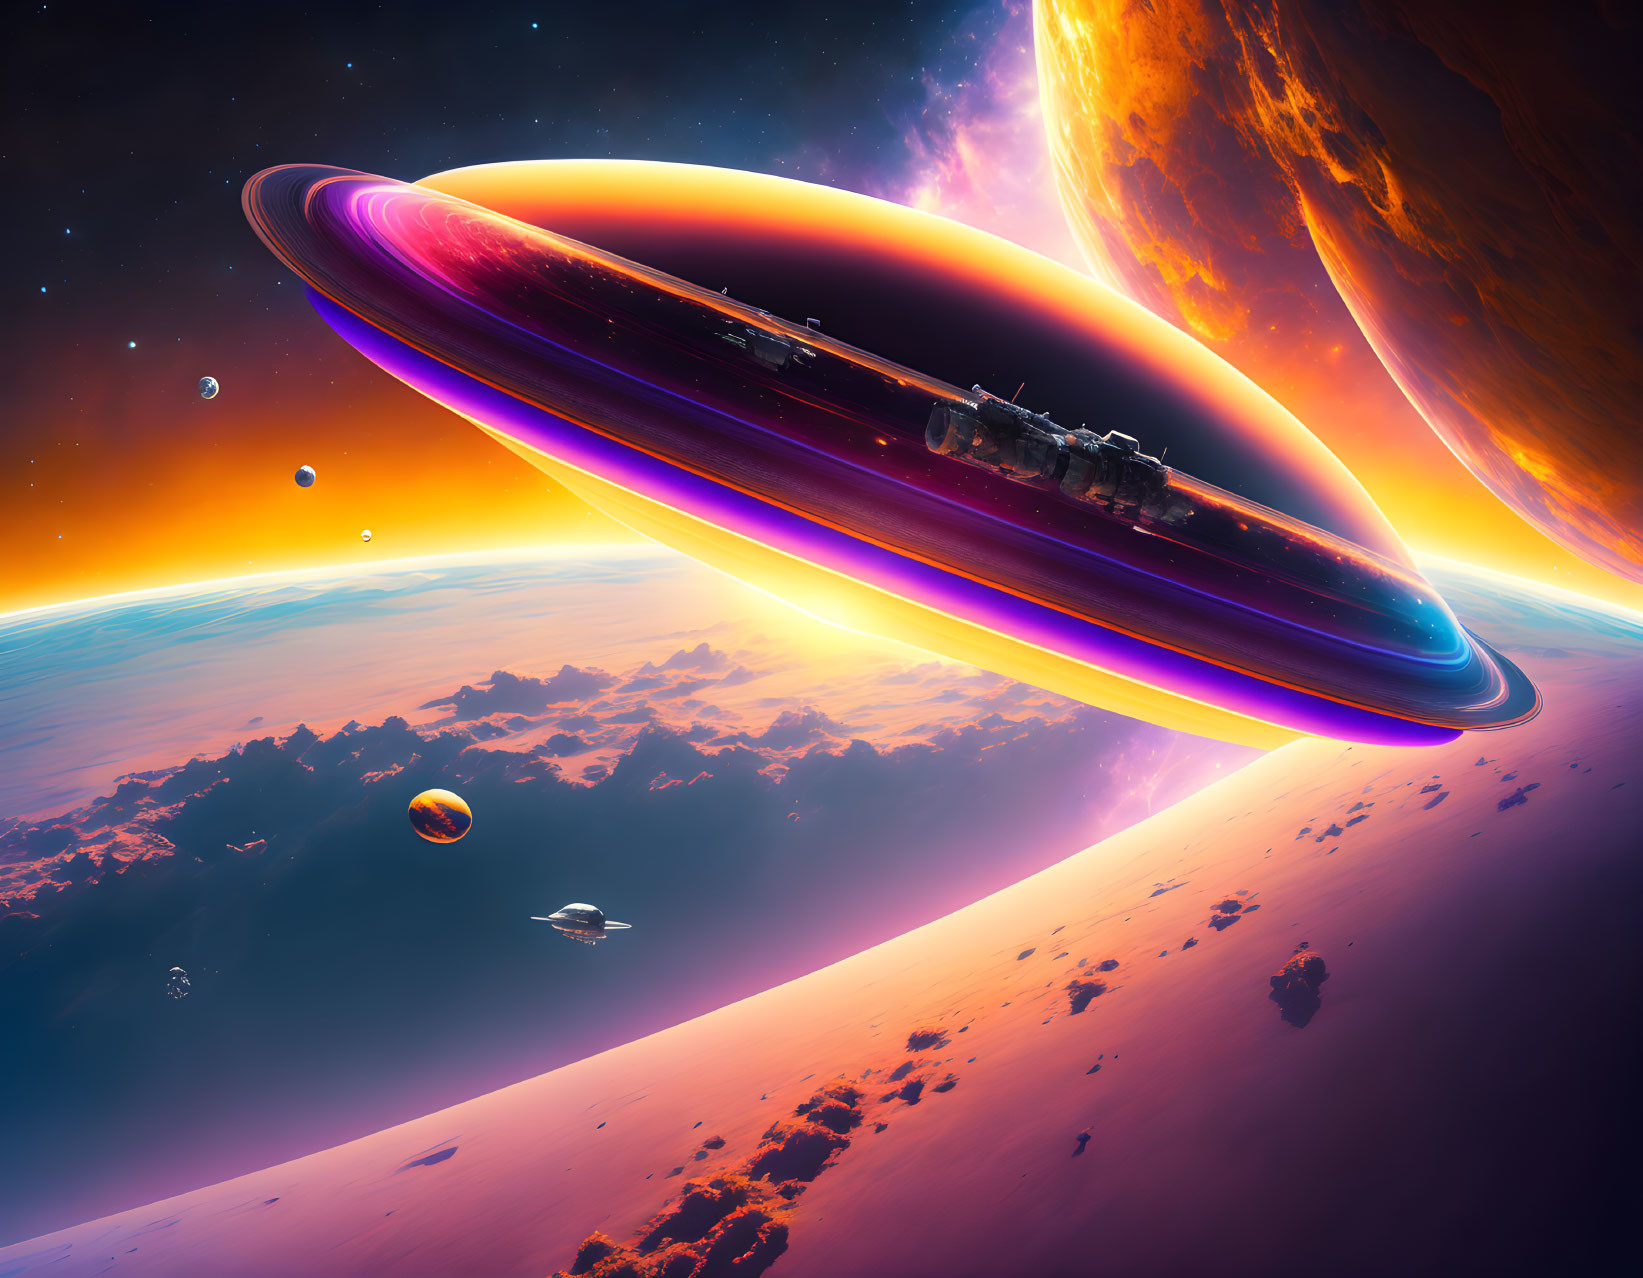 Sci-fi spaceship in cosmic landscape with planets, rings, asteroids, and star